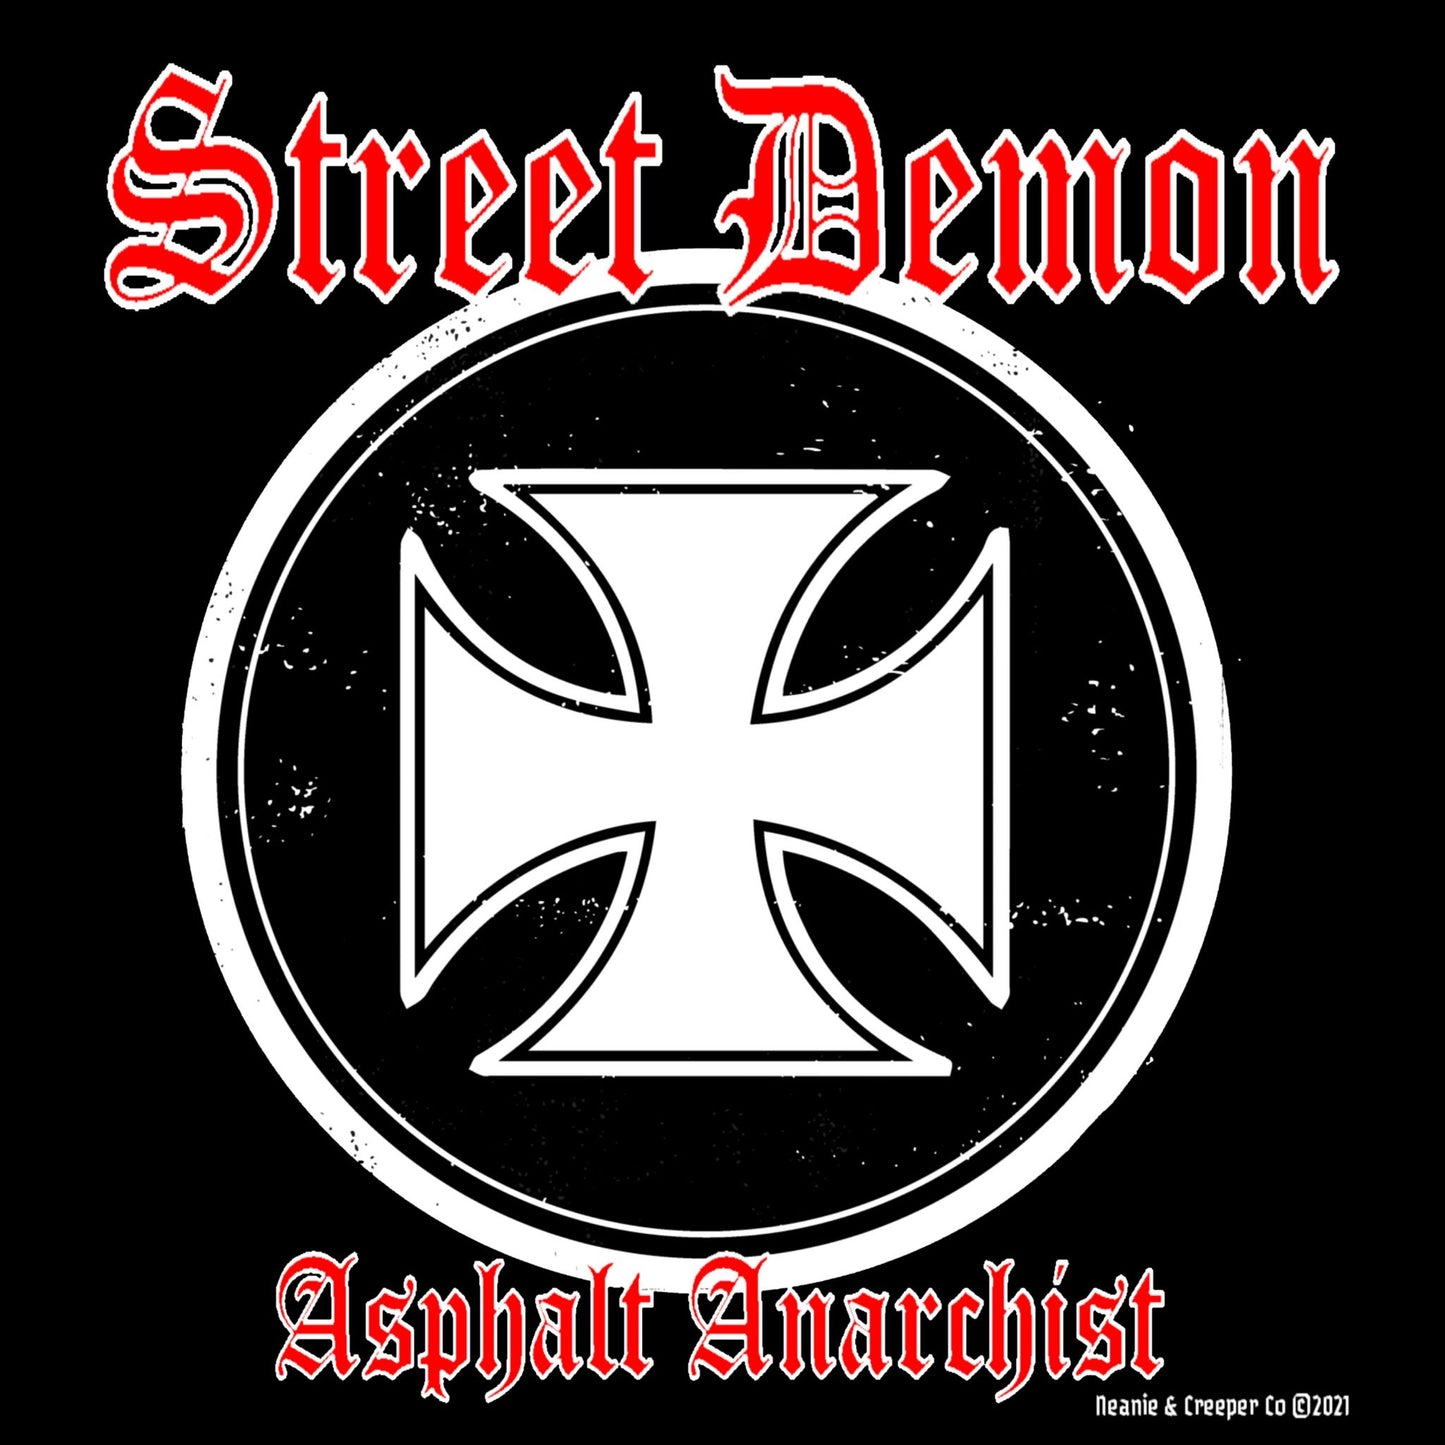 
                  
                    The Street Demon Sticker from Asphalt Anarchist Clothing Co. KUSTOM KULTURE APPAREL & PRODUCTS
                  
                